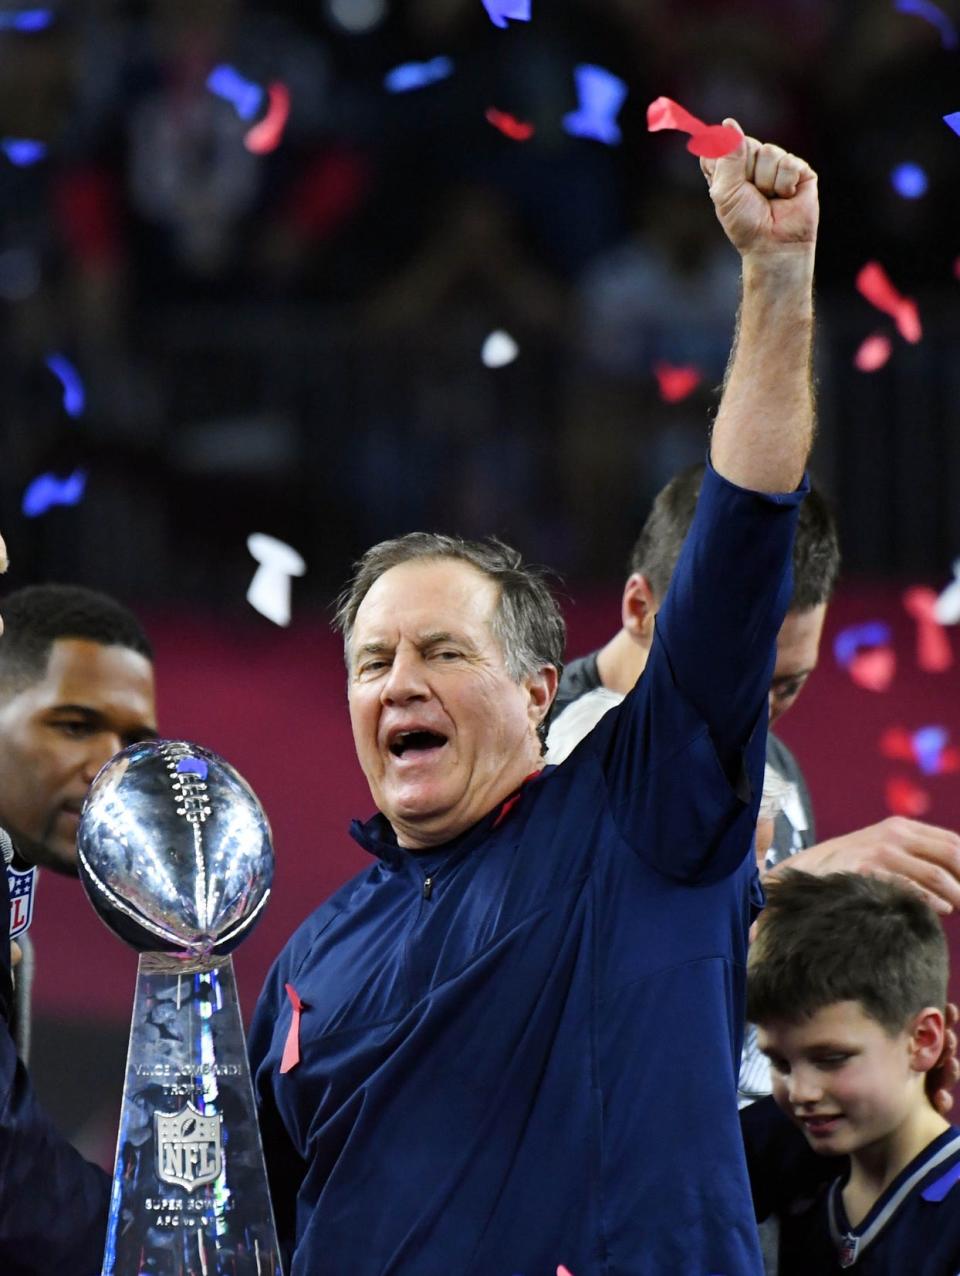 Super Bowl 51, in which New England Patriots defeated the Atlanta Falcons 38-34, was one of a record six Super Bowl titles for Bill Belichick as a head coach.